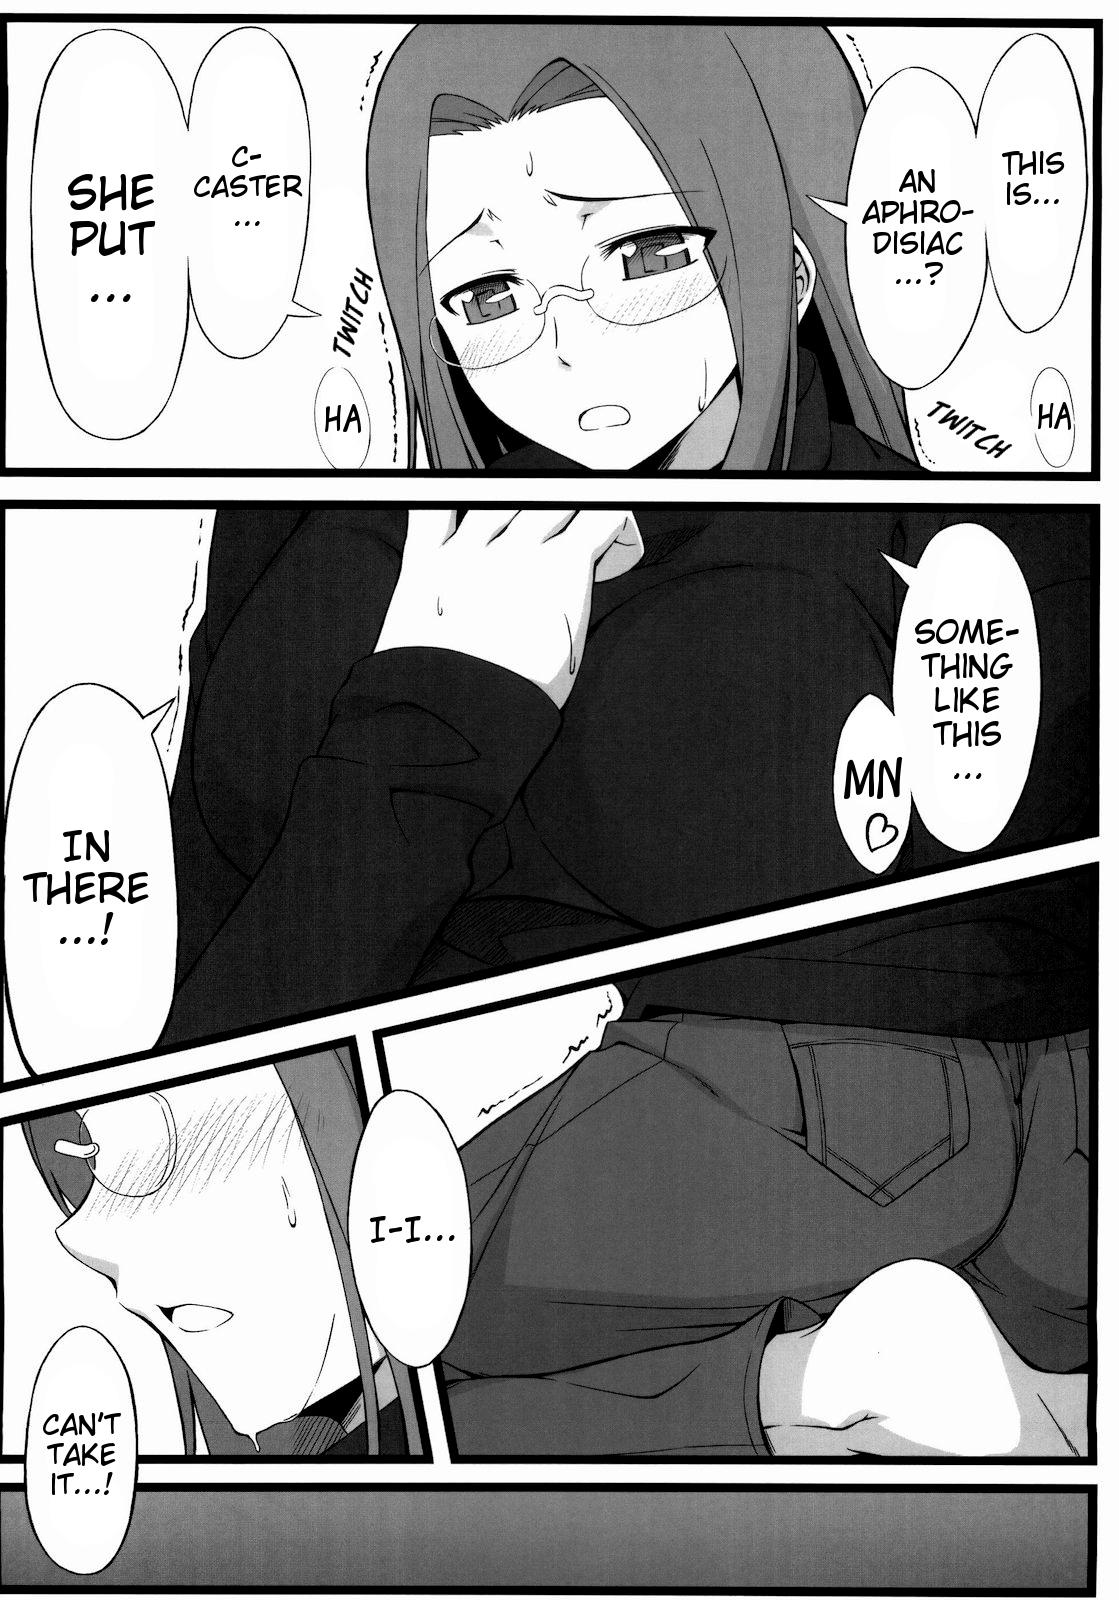 Peeing TEMPTATION - Fate stay night Pete - Page 7